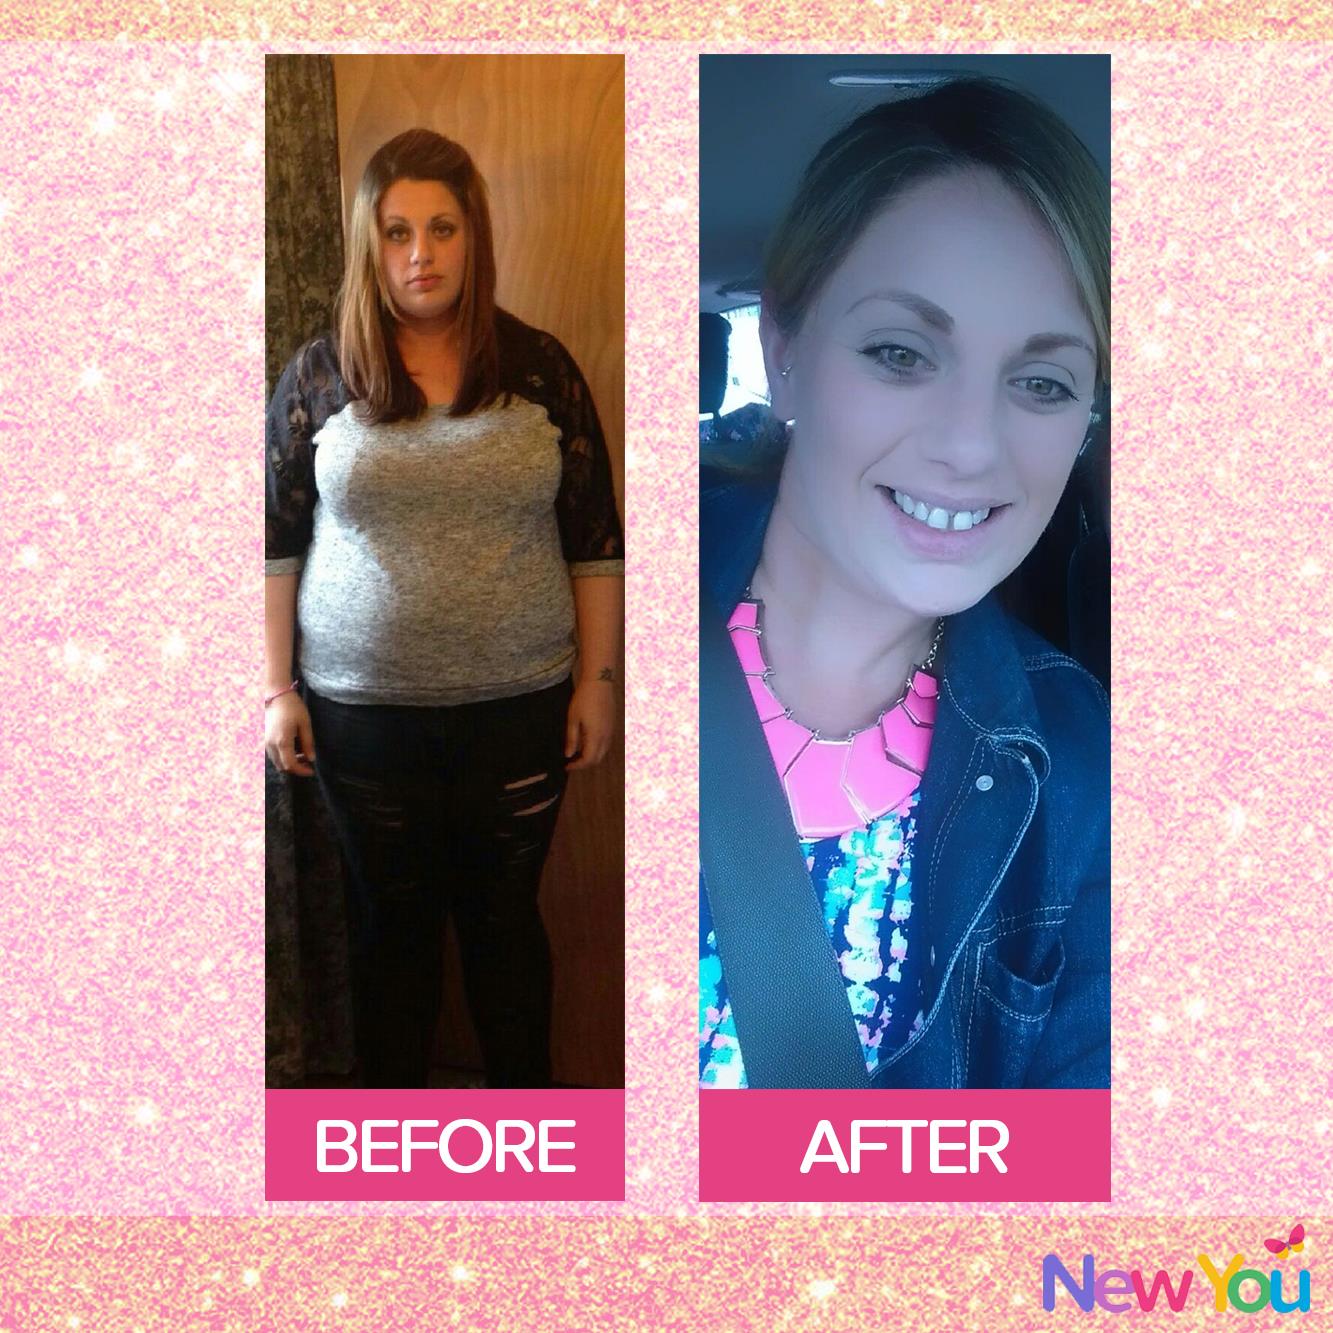 Nicole's amazing before and after photos